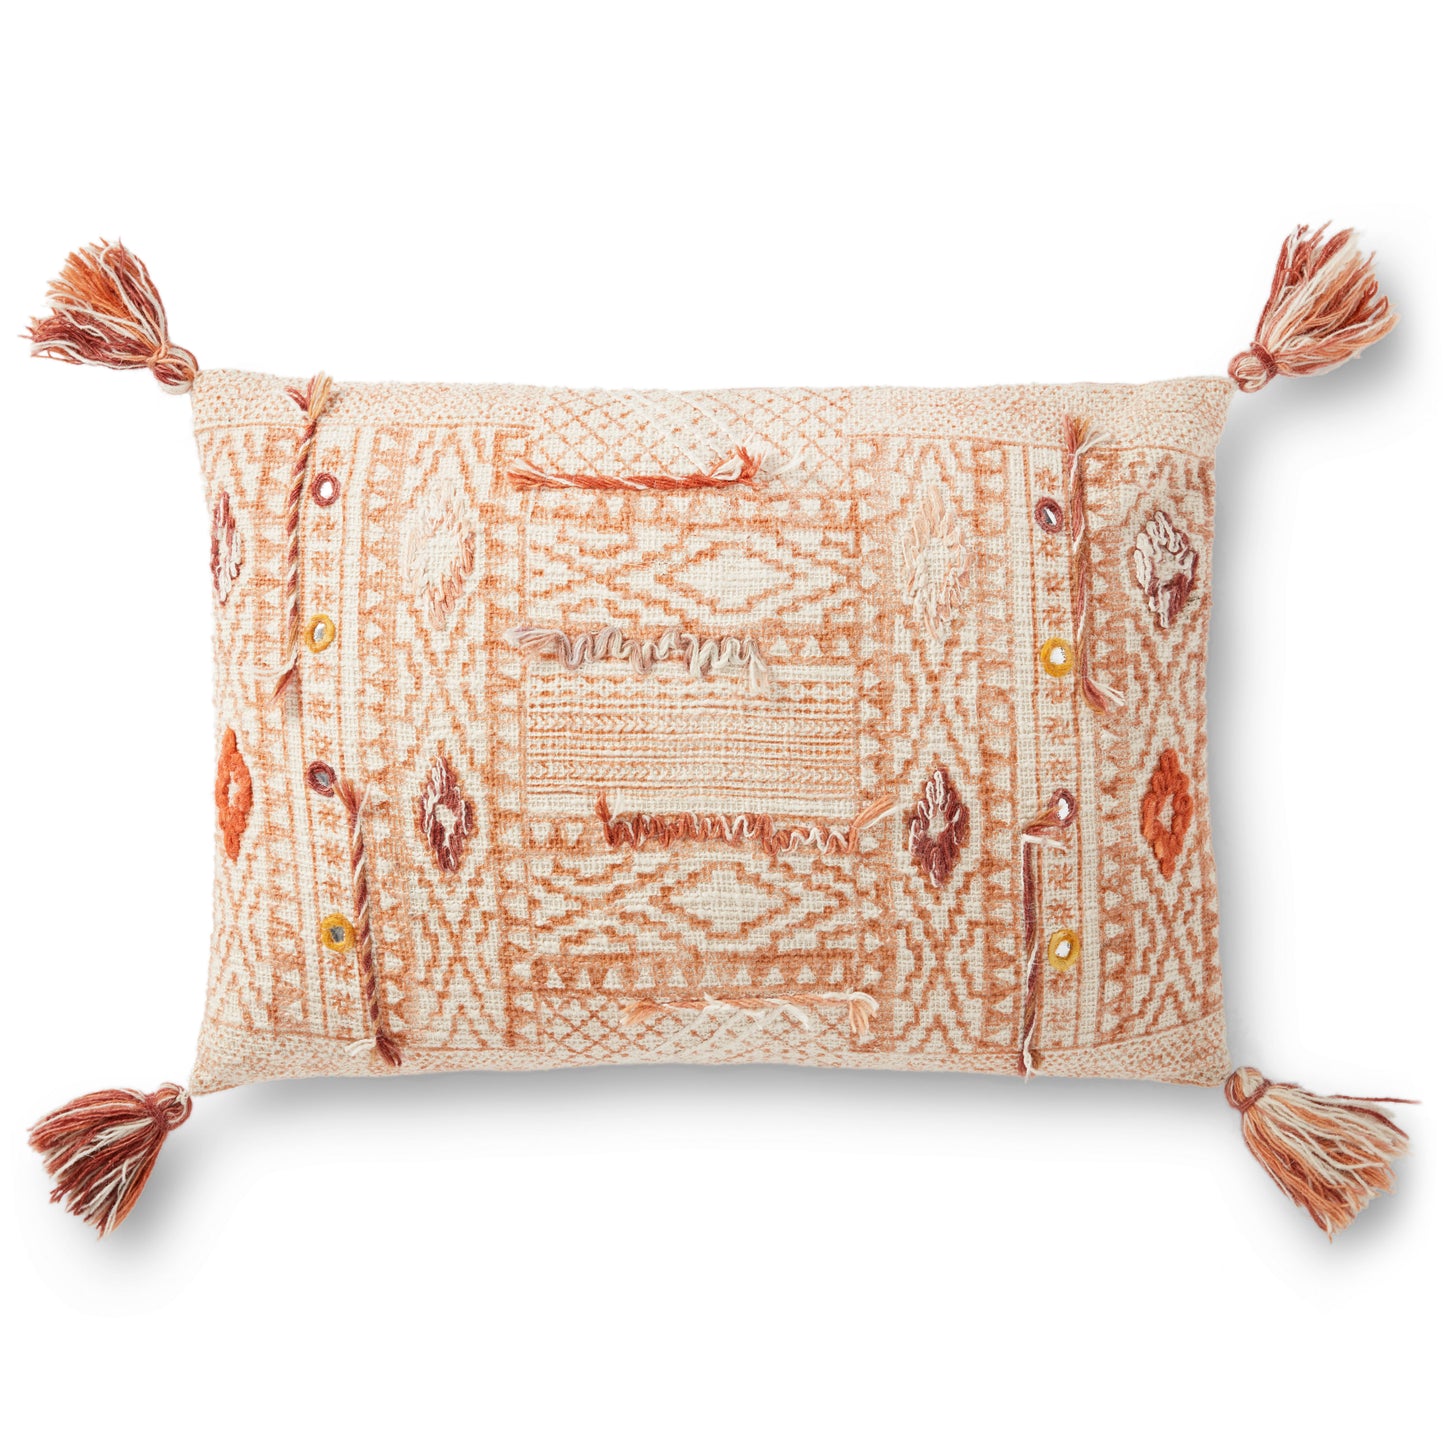 PILLOWS P0877 Cotton Indoor Pillow from Loloi